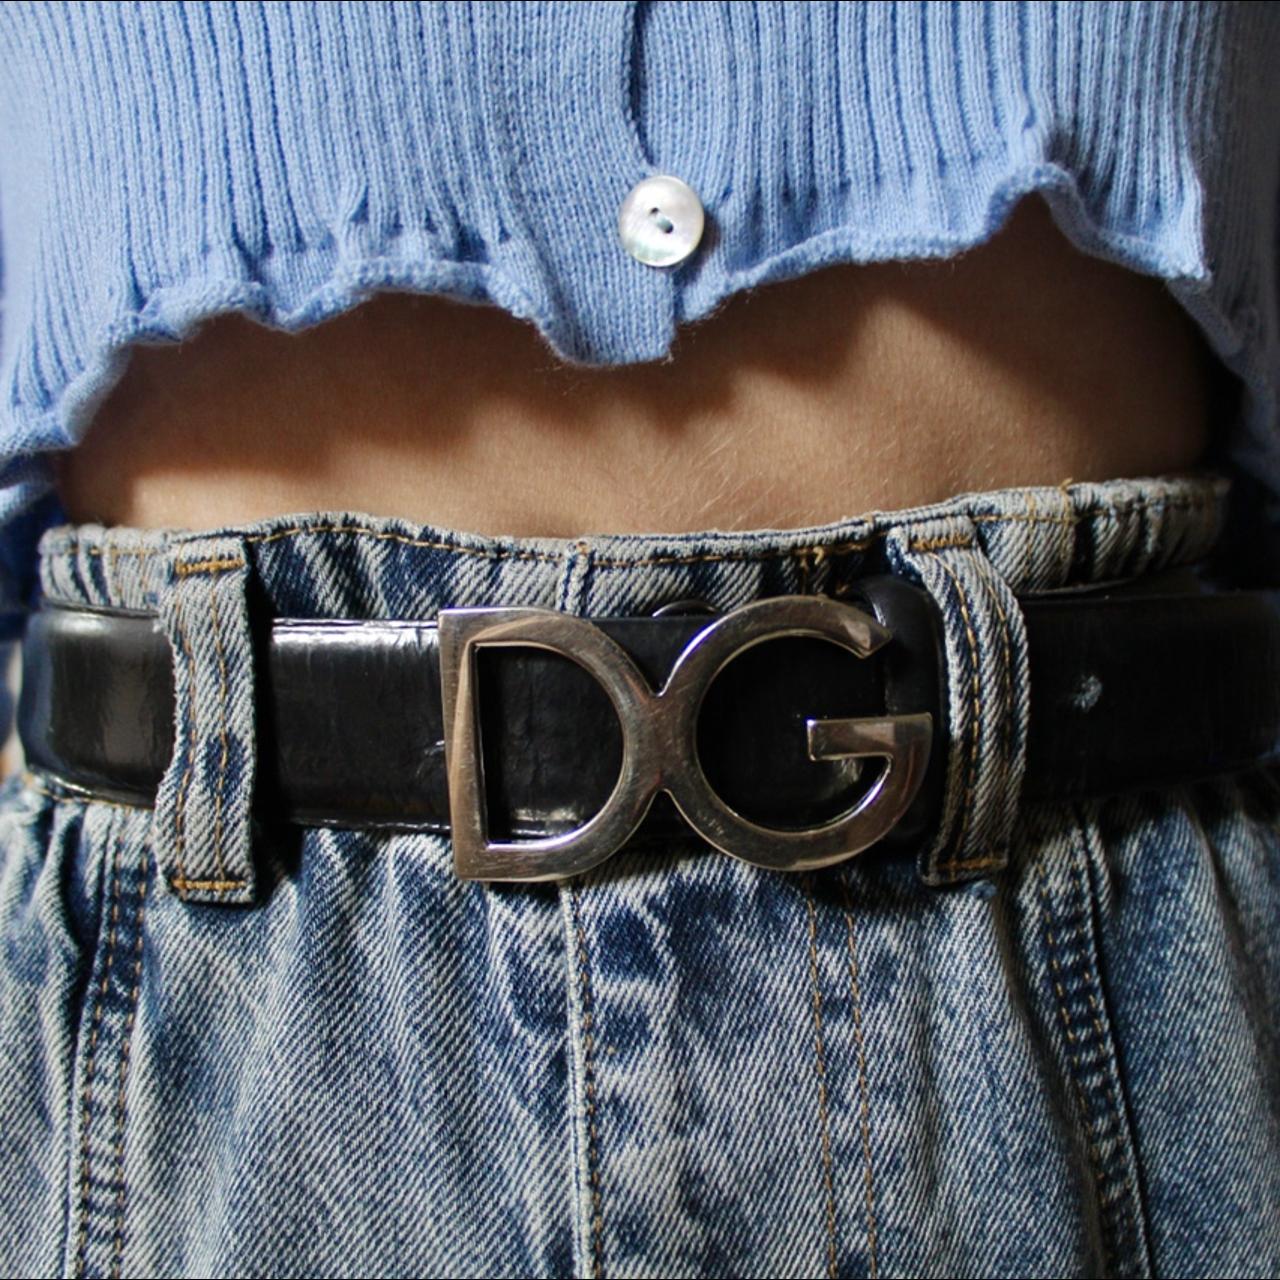 Product Image 3 - Genuine Dolce and Gabbana vintage